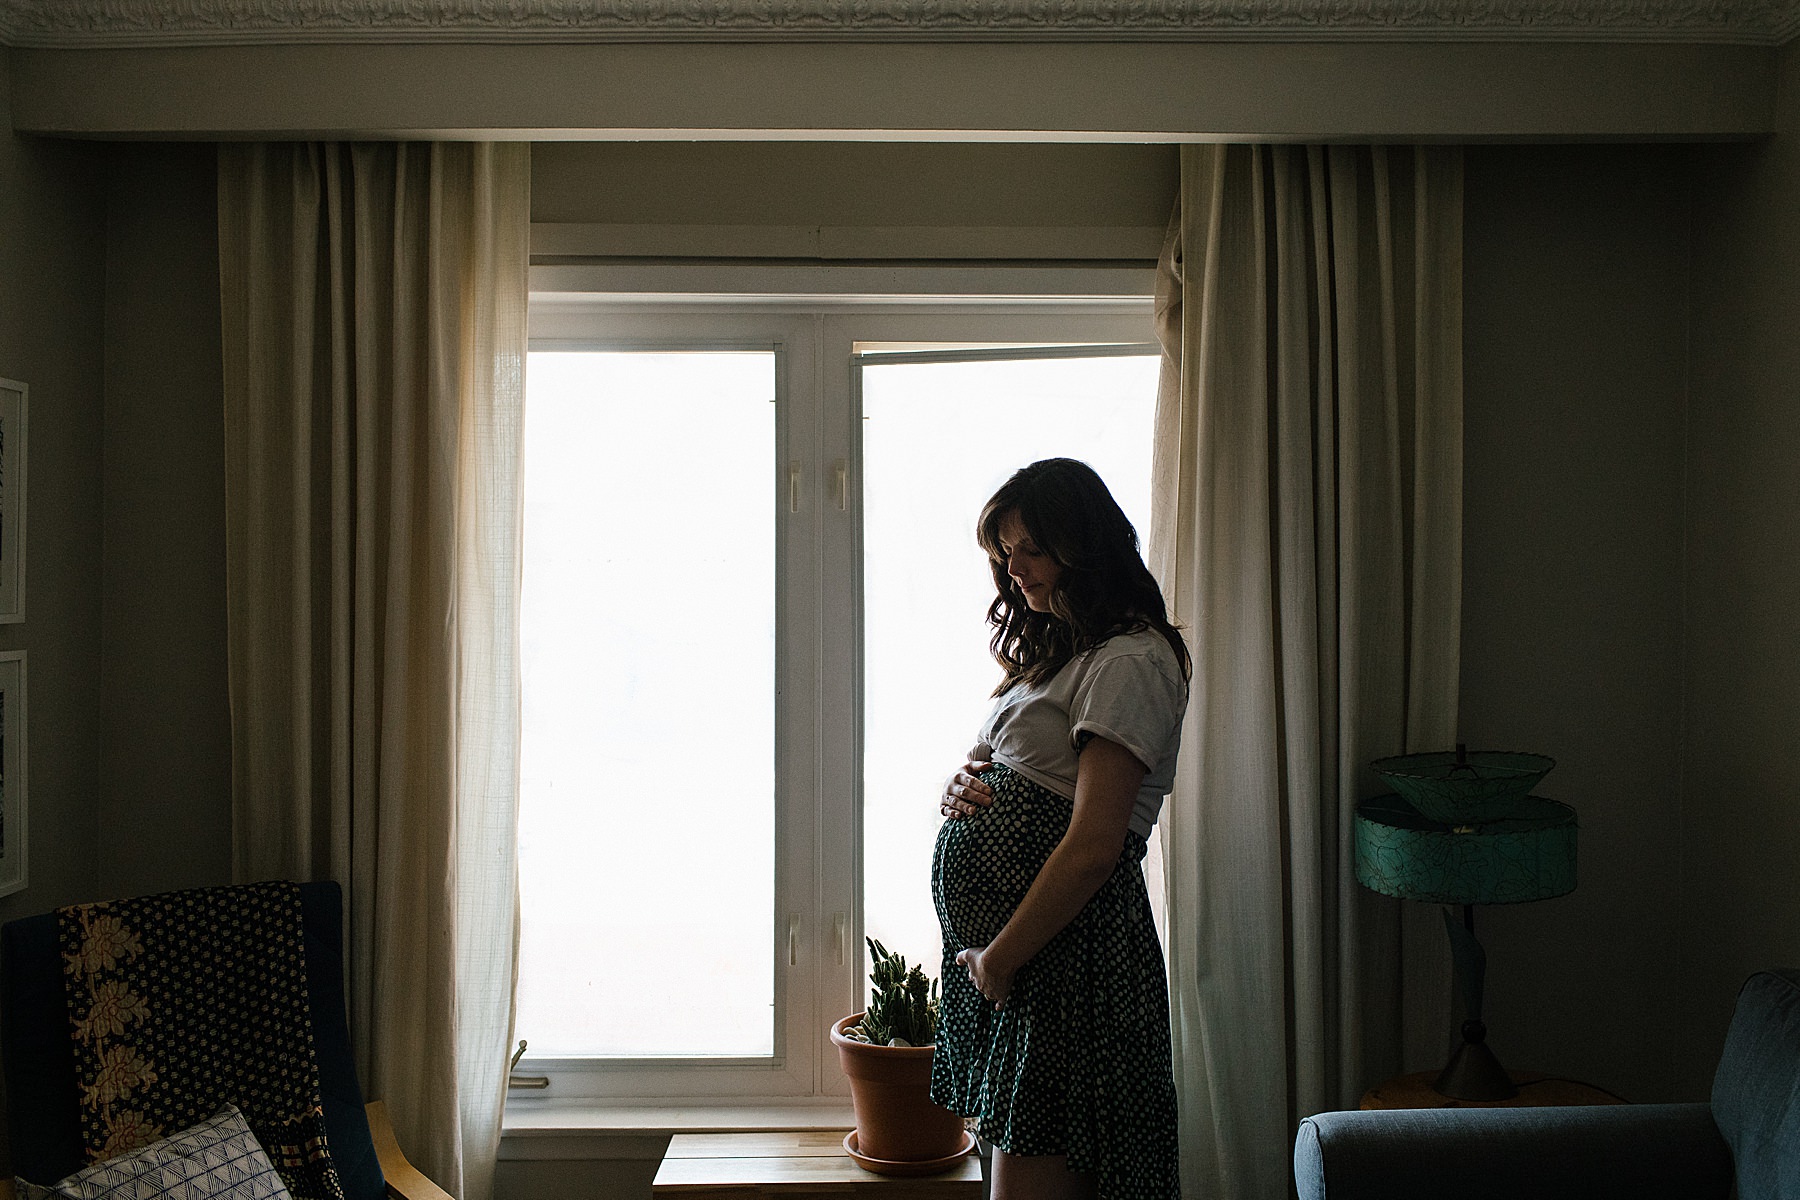 maternity photography toronto pregnancy photoshoot showing a heavily pregnant woman standing by a window holding her baby bump in mississauga GTA ontario